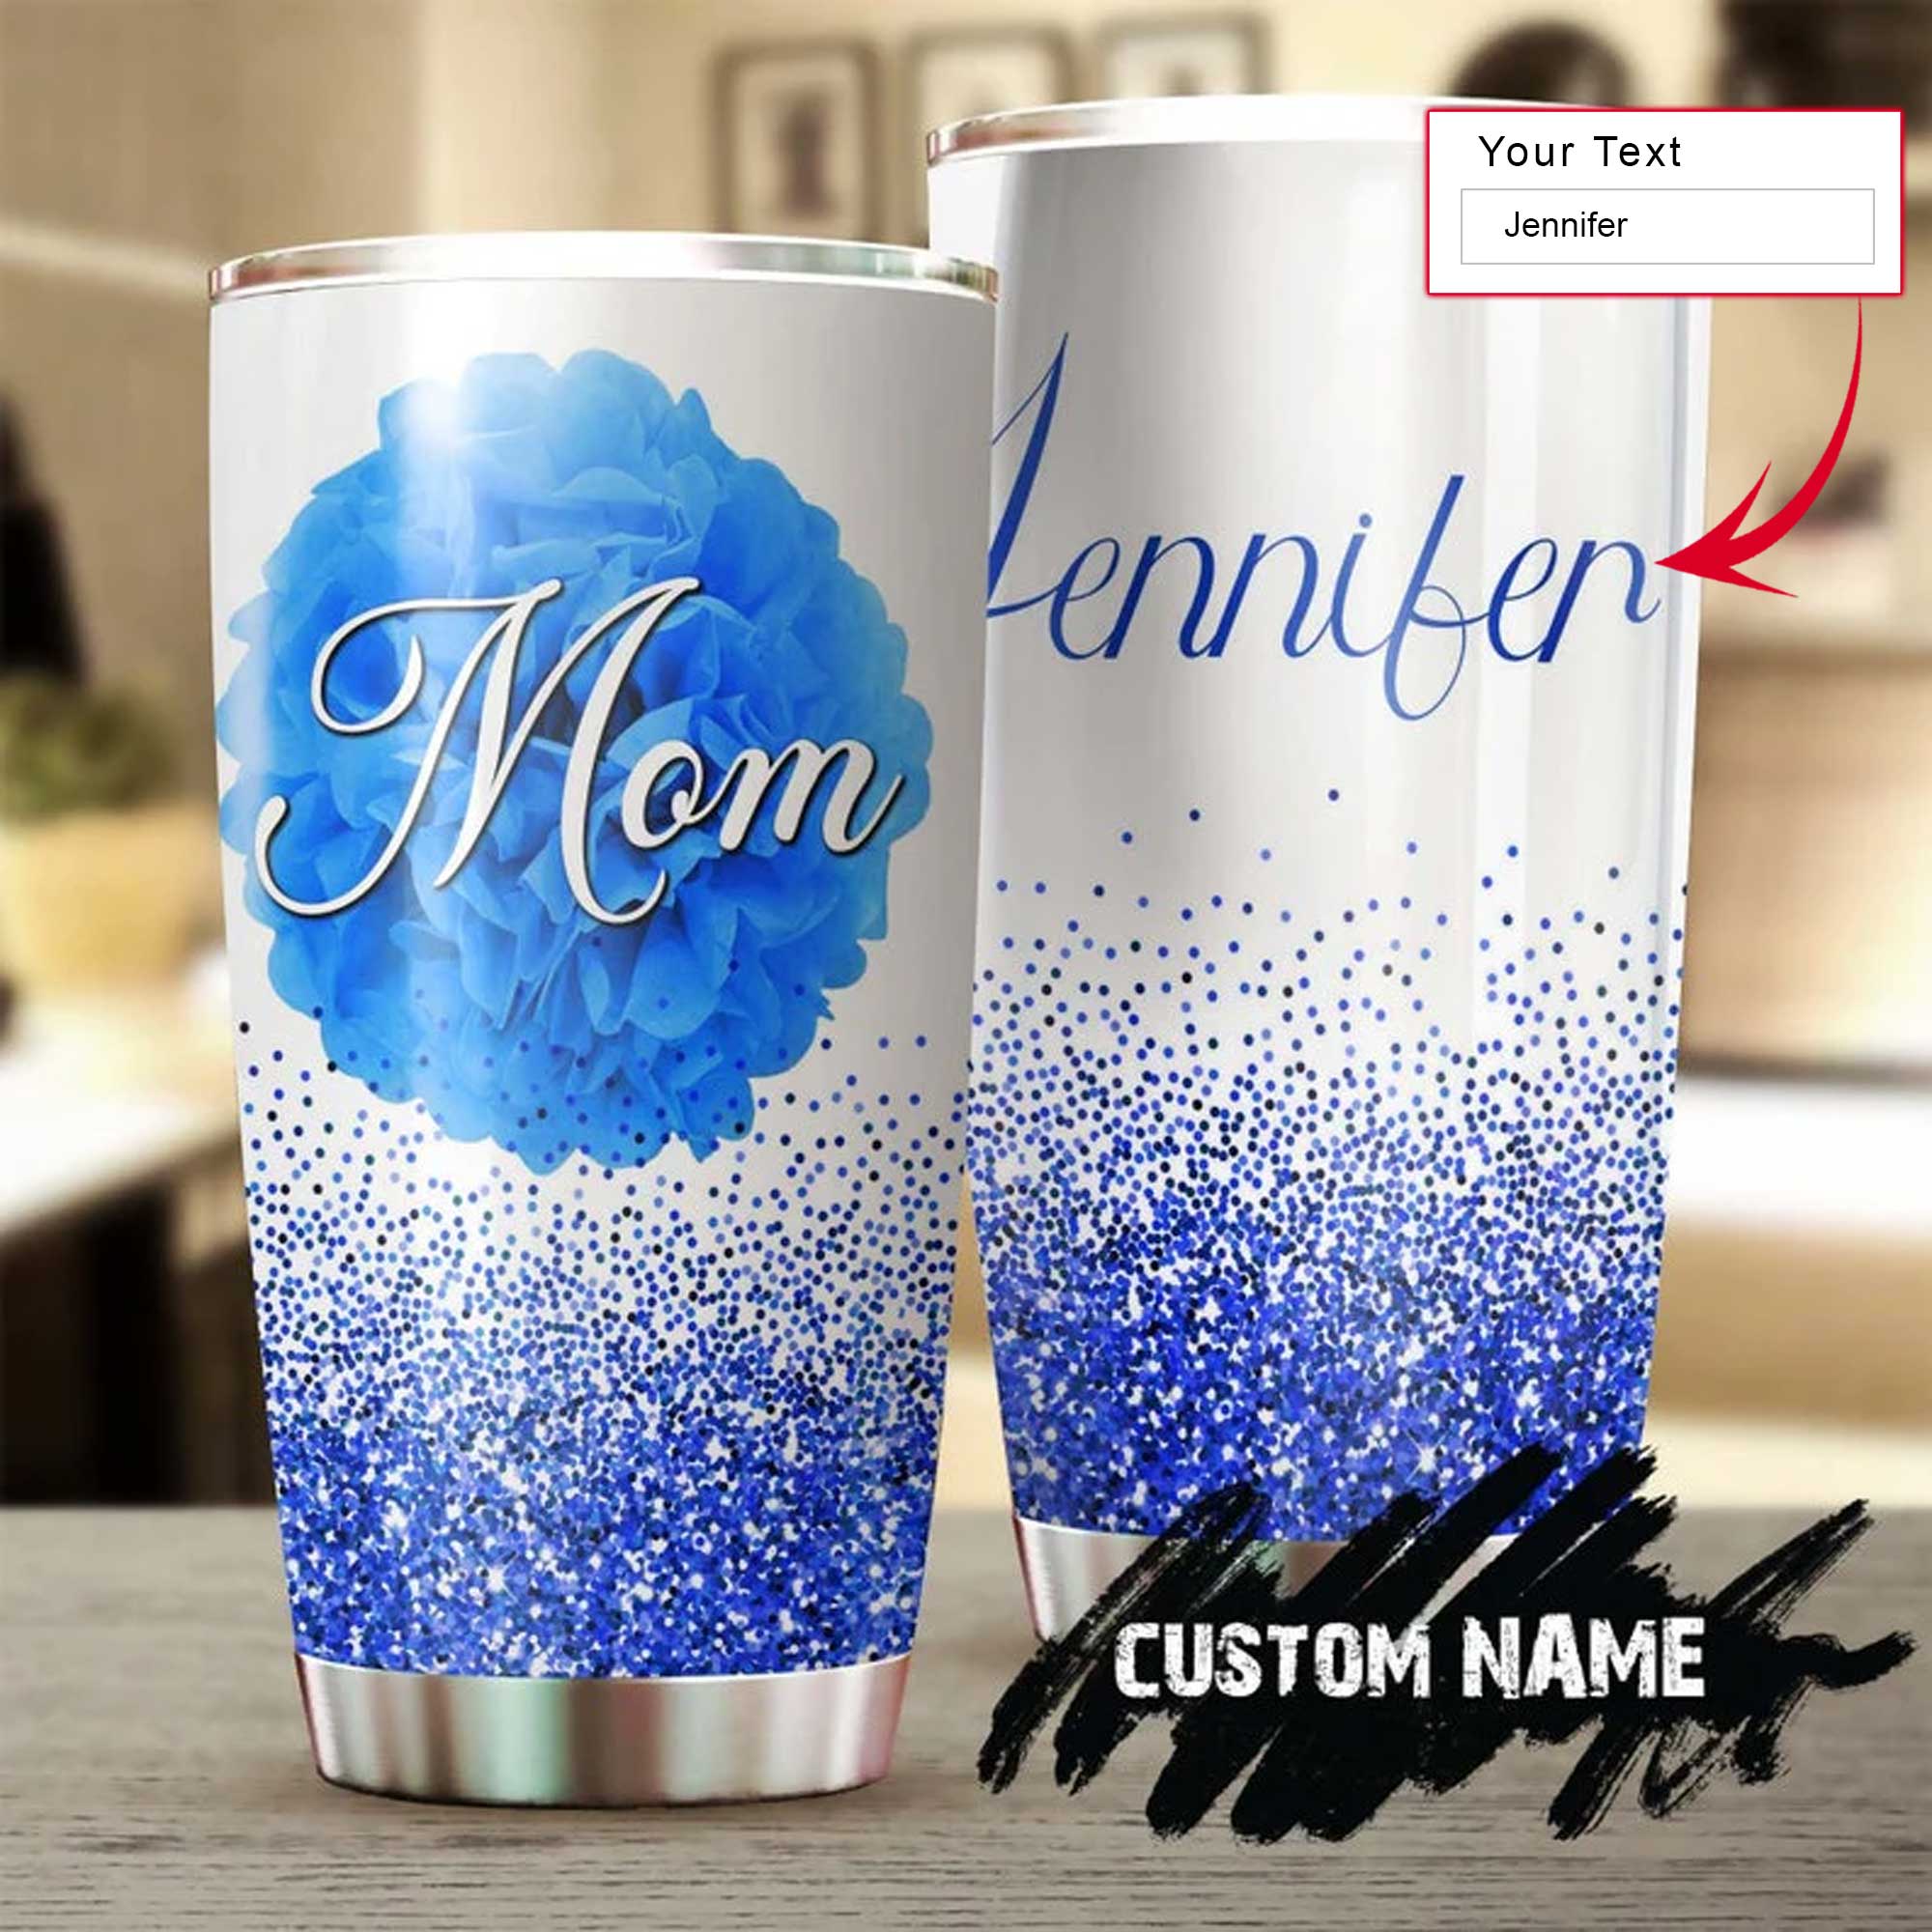 Personalized Mother's Day Gift Tumbler - Custom Gift For Mother's Day, Presents for Mom - Blue Rose Mom Beautiful Meaningful Tumbler